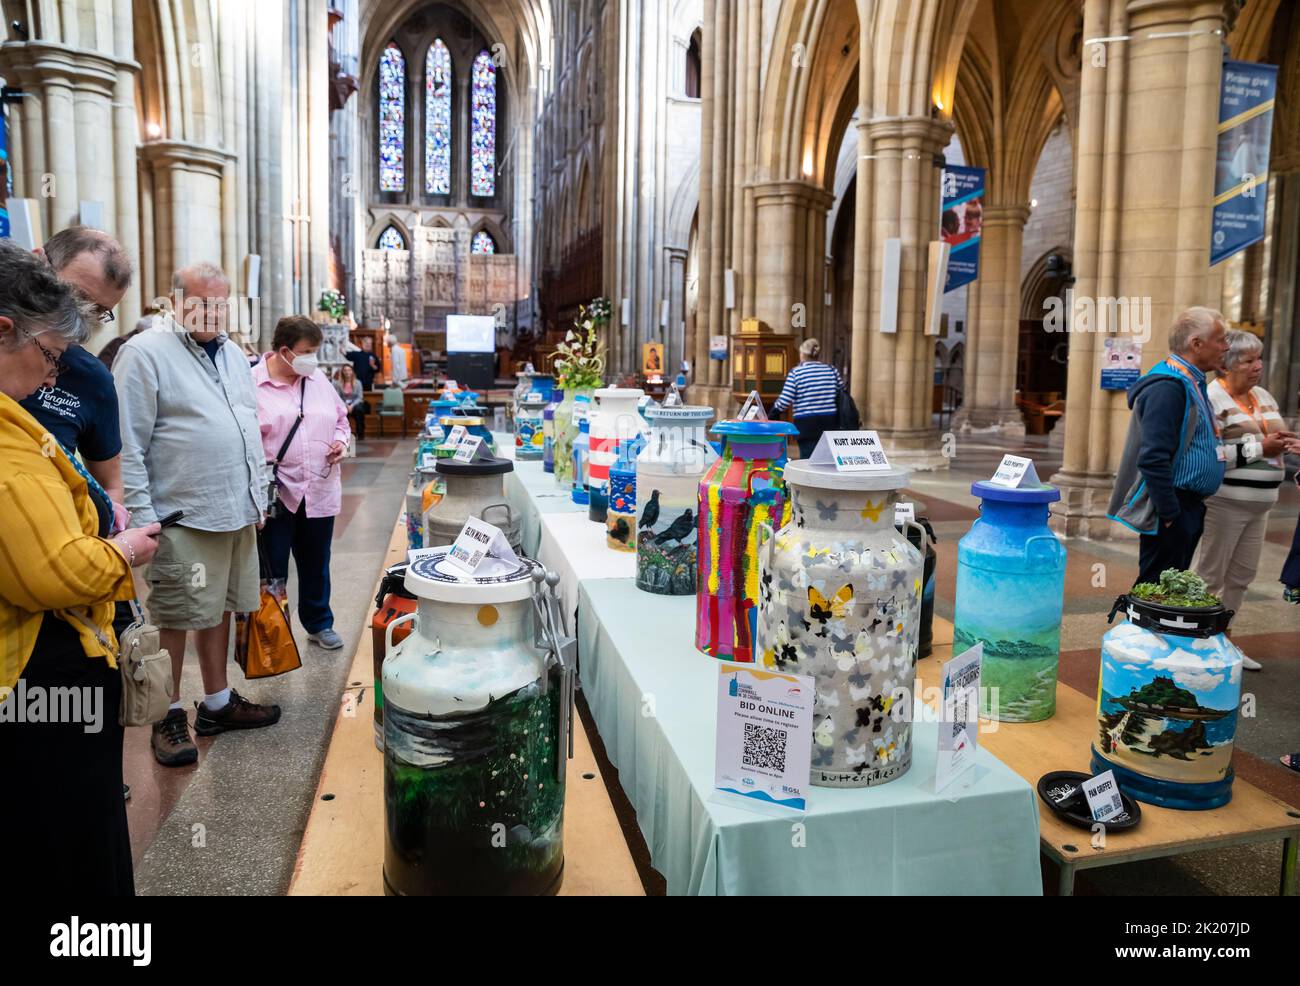 Truro,Cornwall,UK,21st September 2022,Around Cornwall in 38 churns is a passionately created project by Sue Dennett to raise funds for Cornwall Hospice Care whilst showcasing Cornwall’s very talented artists and also highlighting many stunning locations across the county. The churns have been on display all across the county before being showcased today in Truro Cathedral then auctioned this Evening.Credit: Keith Larby/Alamy Live News Stock Photo